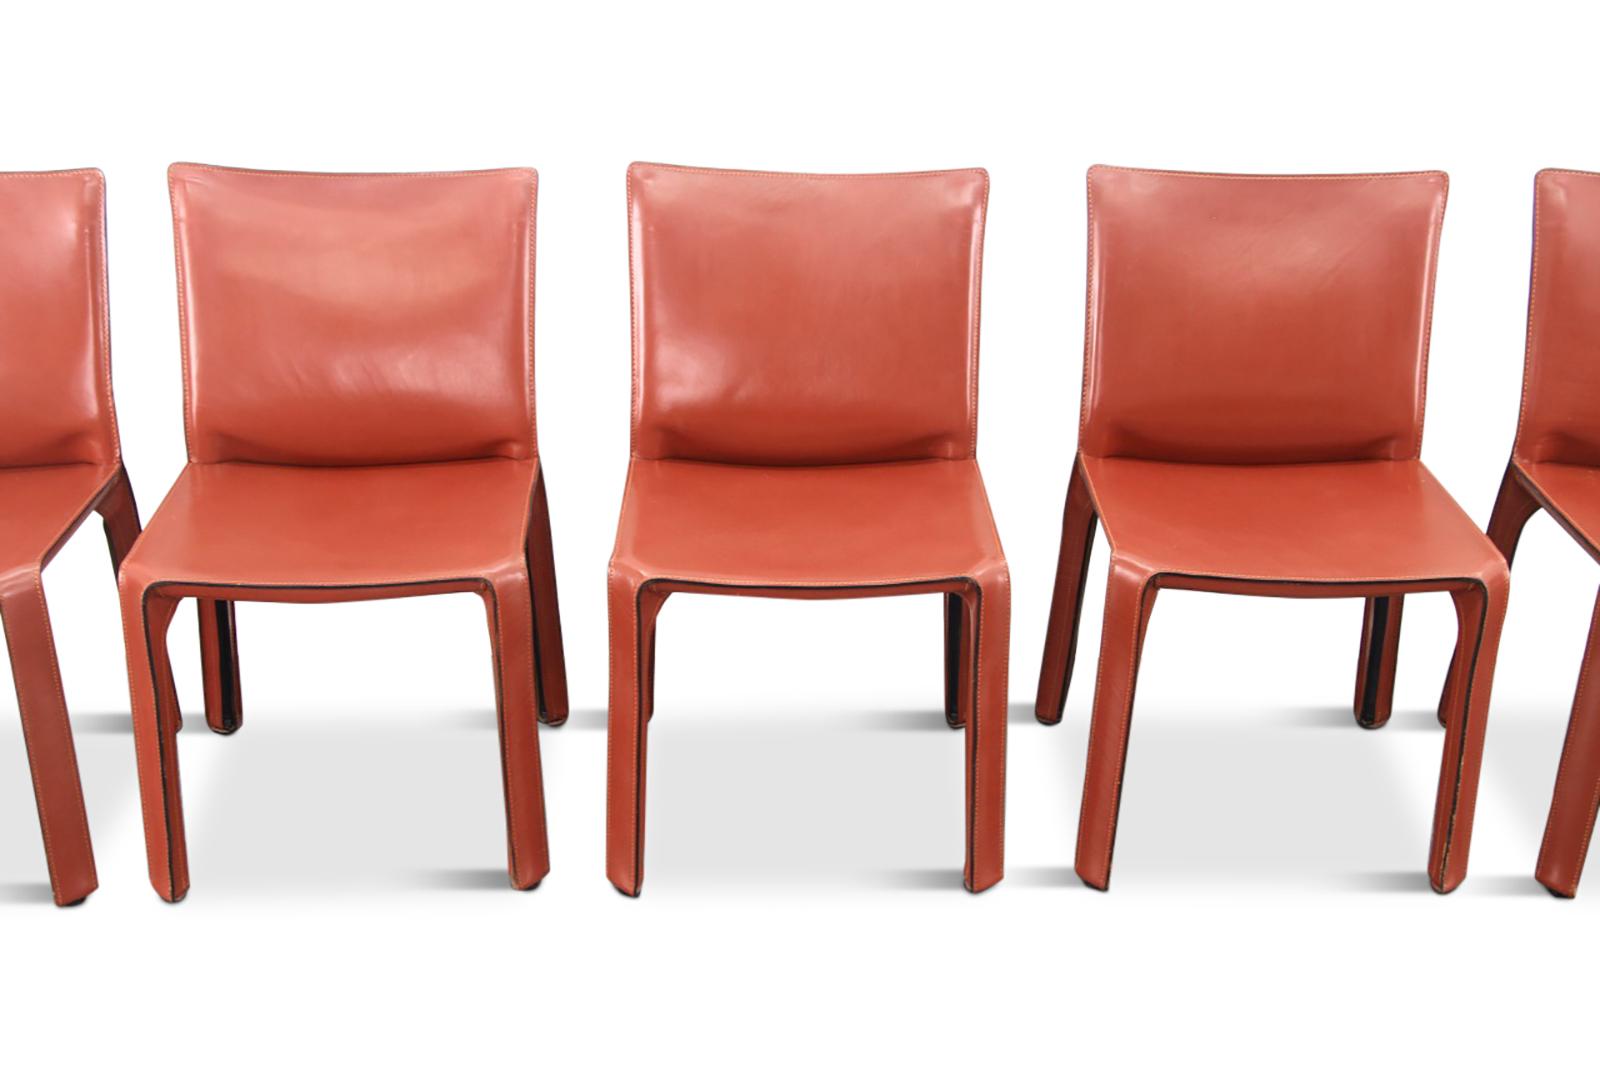 Mid-Century Modern Mario Bellini Cab Chairs in Oxblood Red Leather for Cassina, 1977